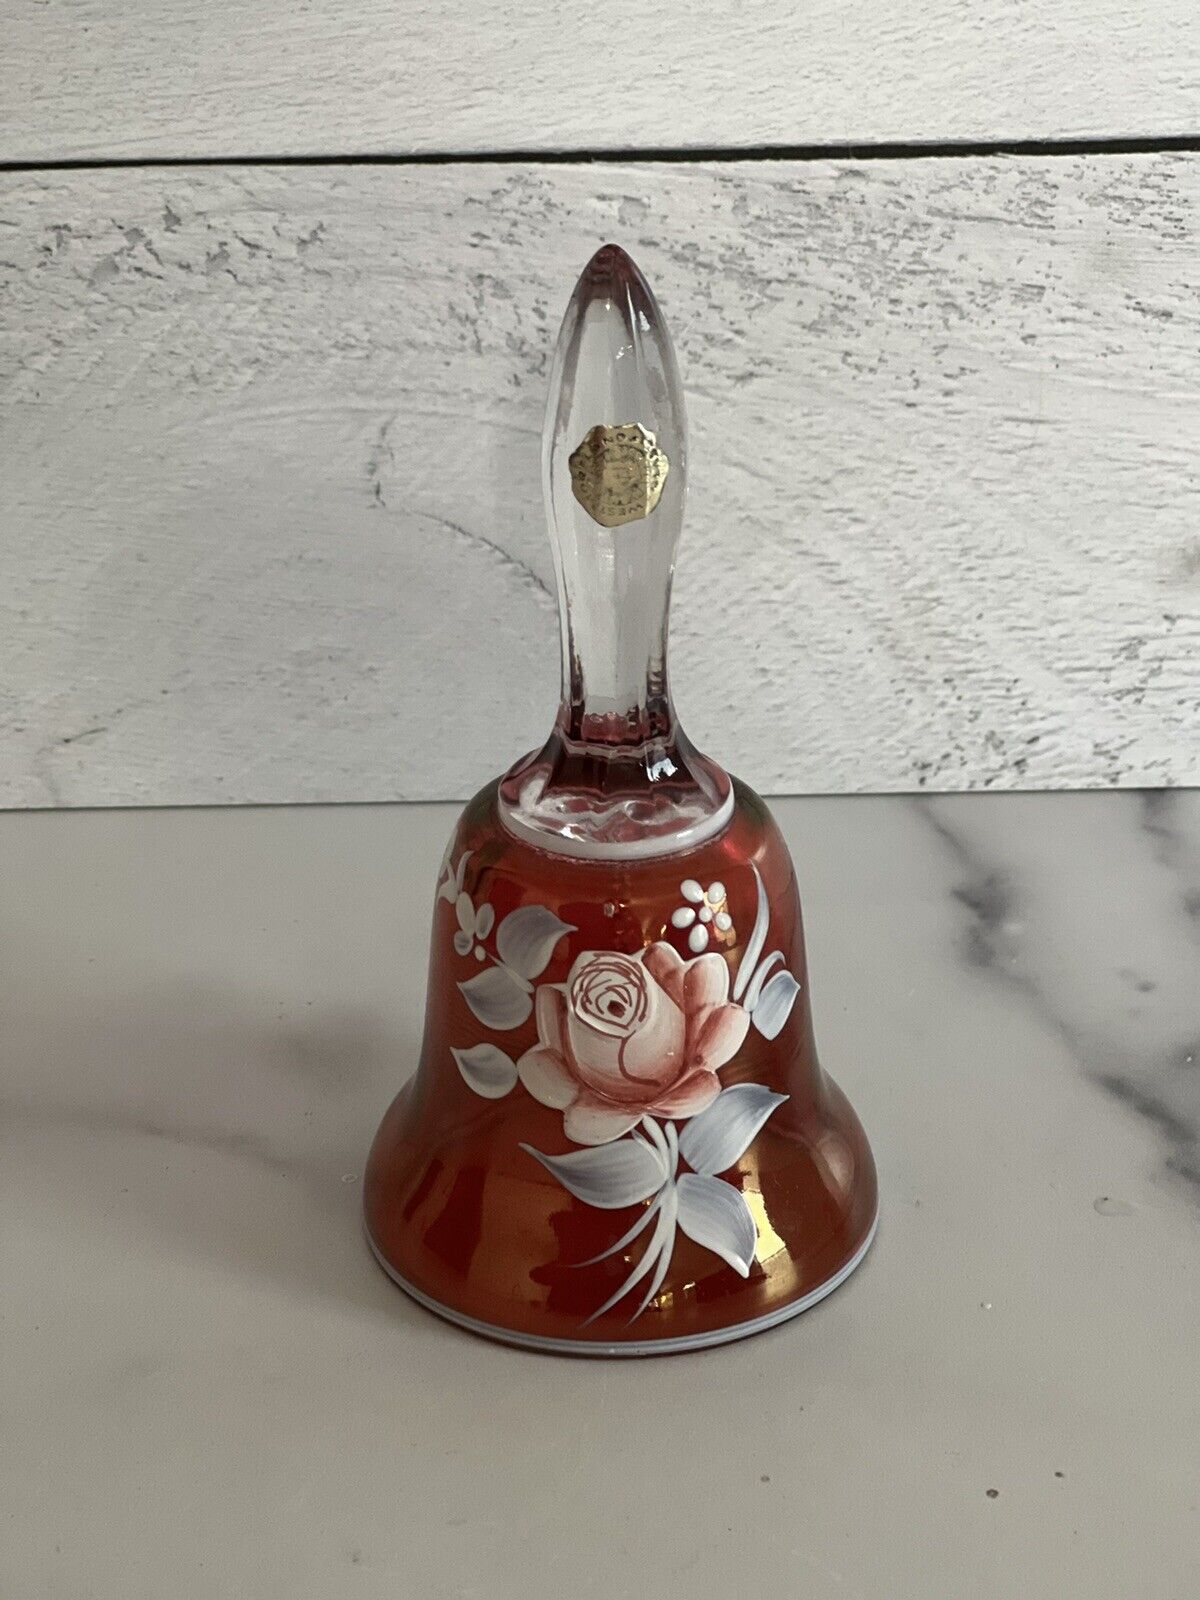 1977 Vintage Collectible Westmoreland Ruby Red Bell, Hand Painted by C. Peltier